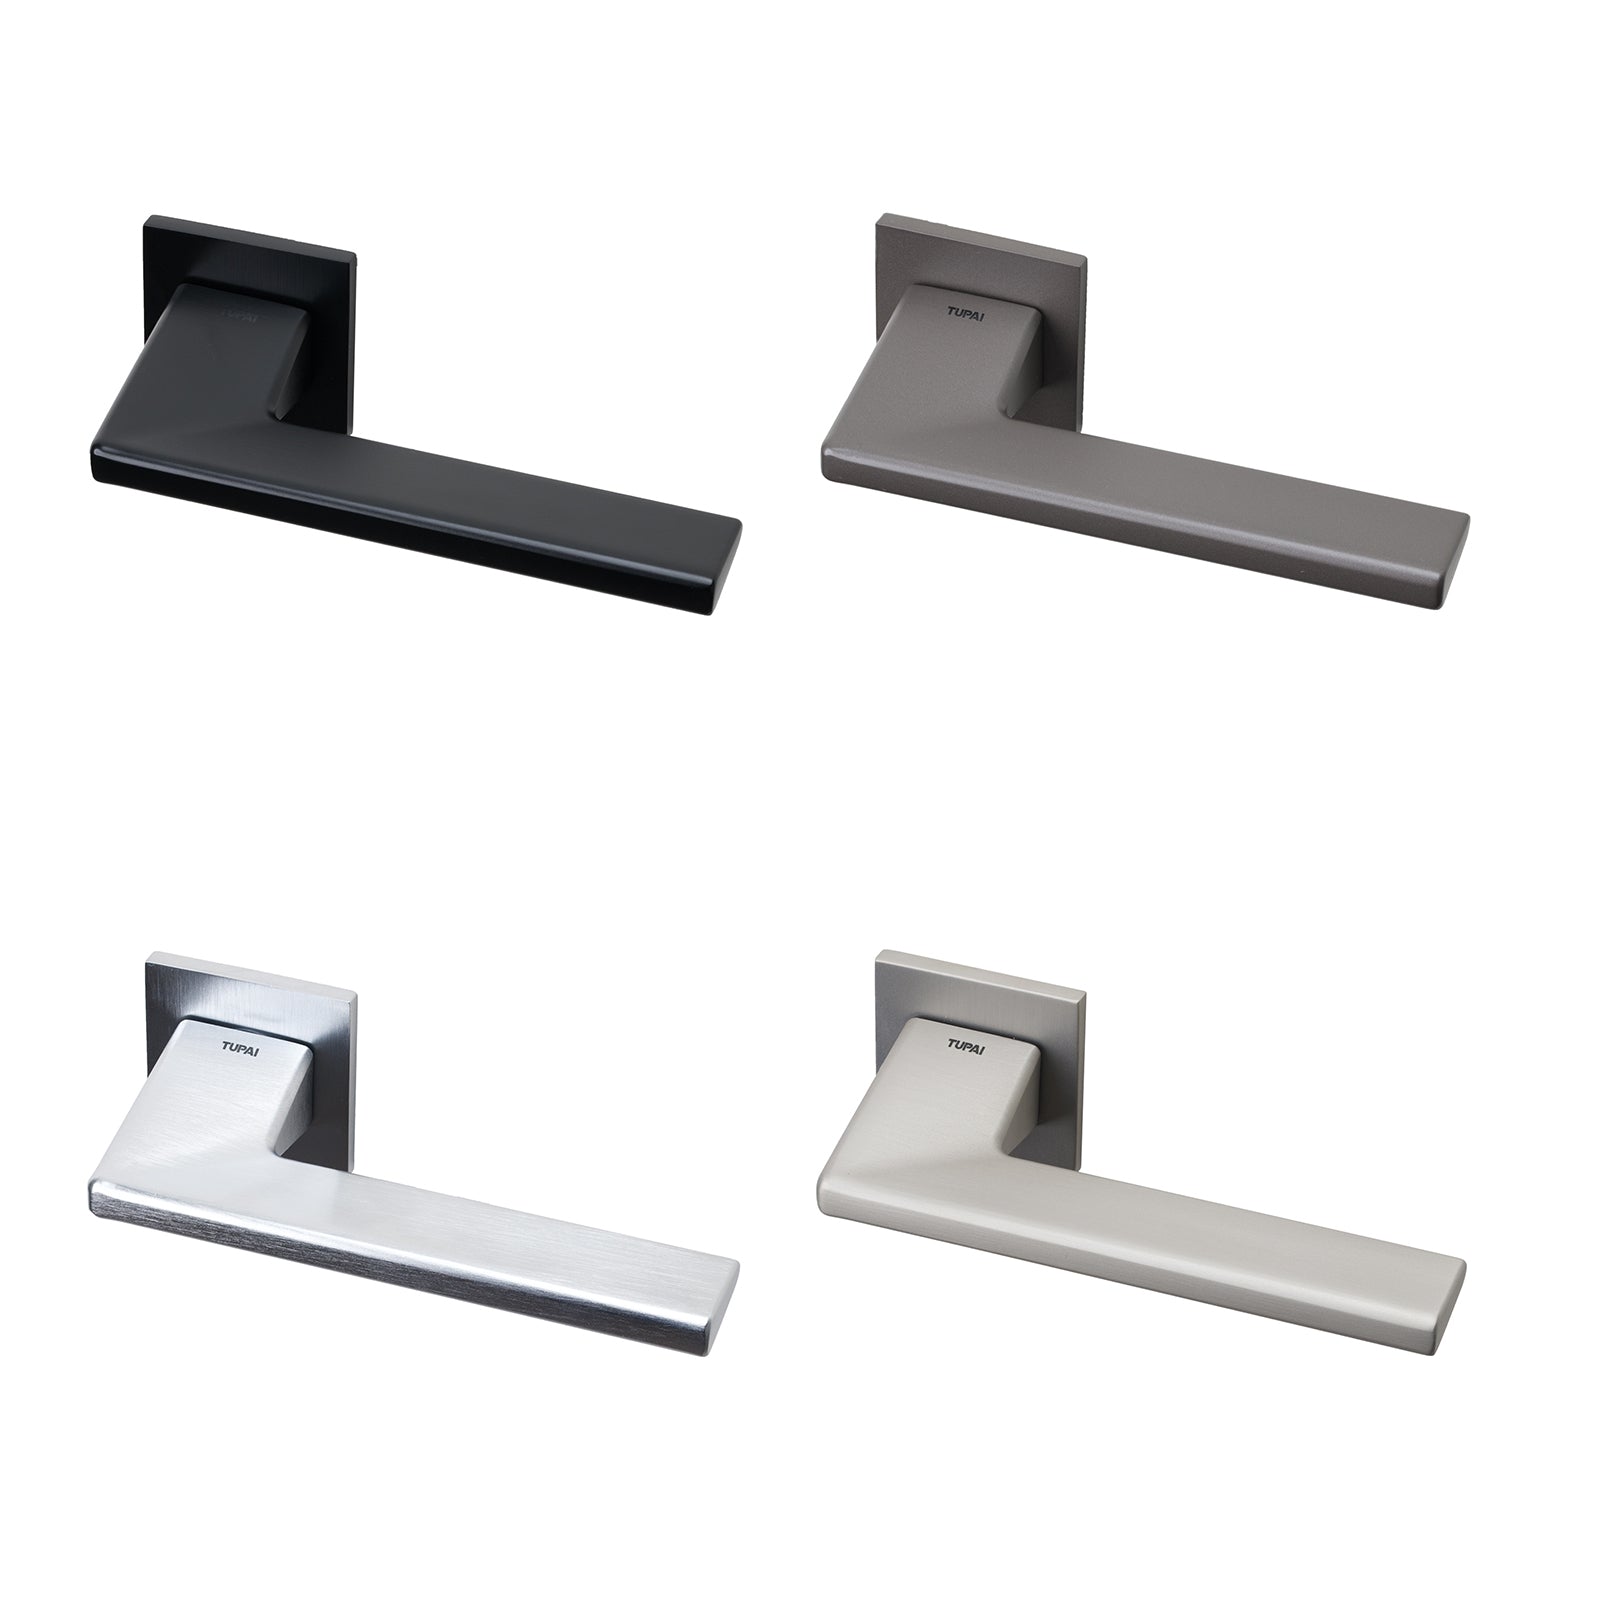 Tupai Rocha lever on rose door handles in four distinct finishes with 6mm thick square rose plate.